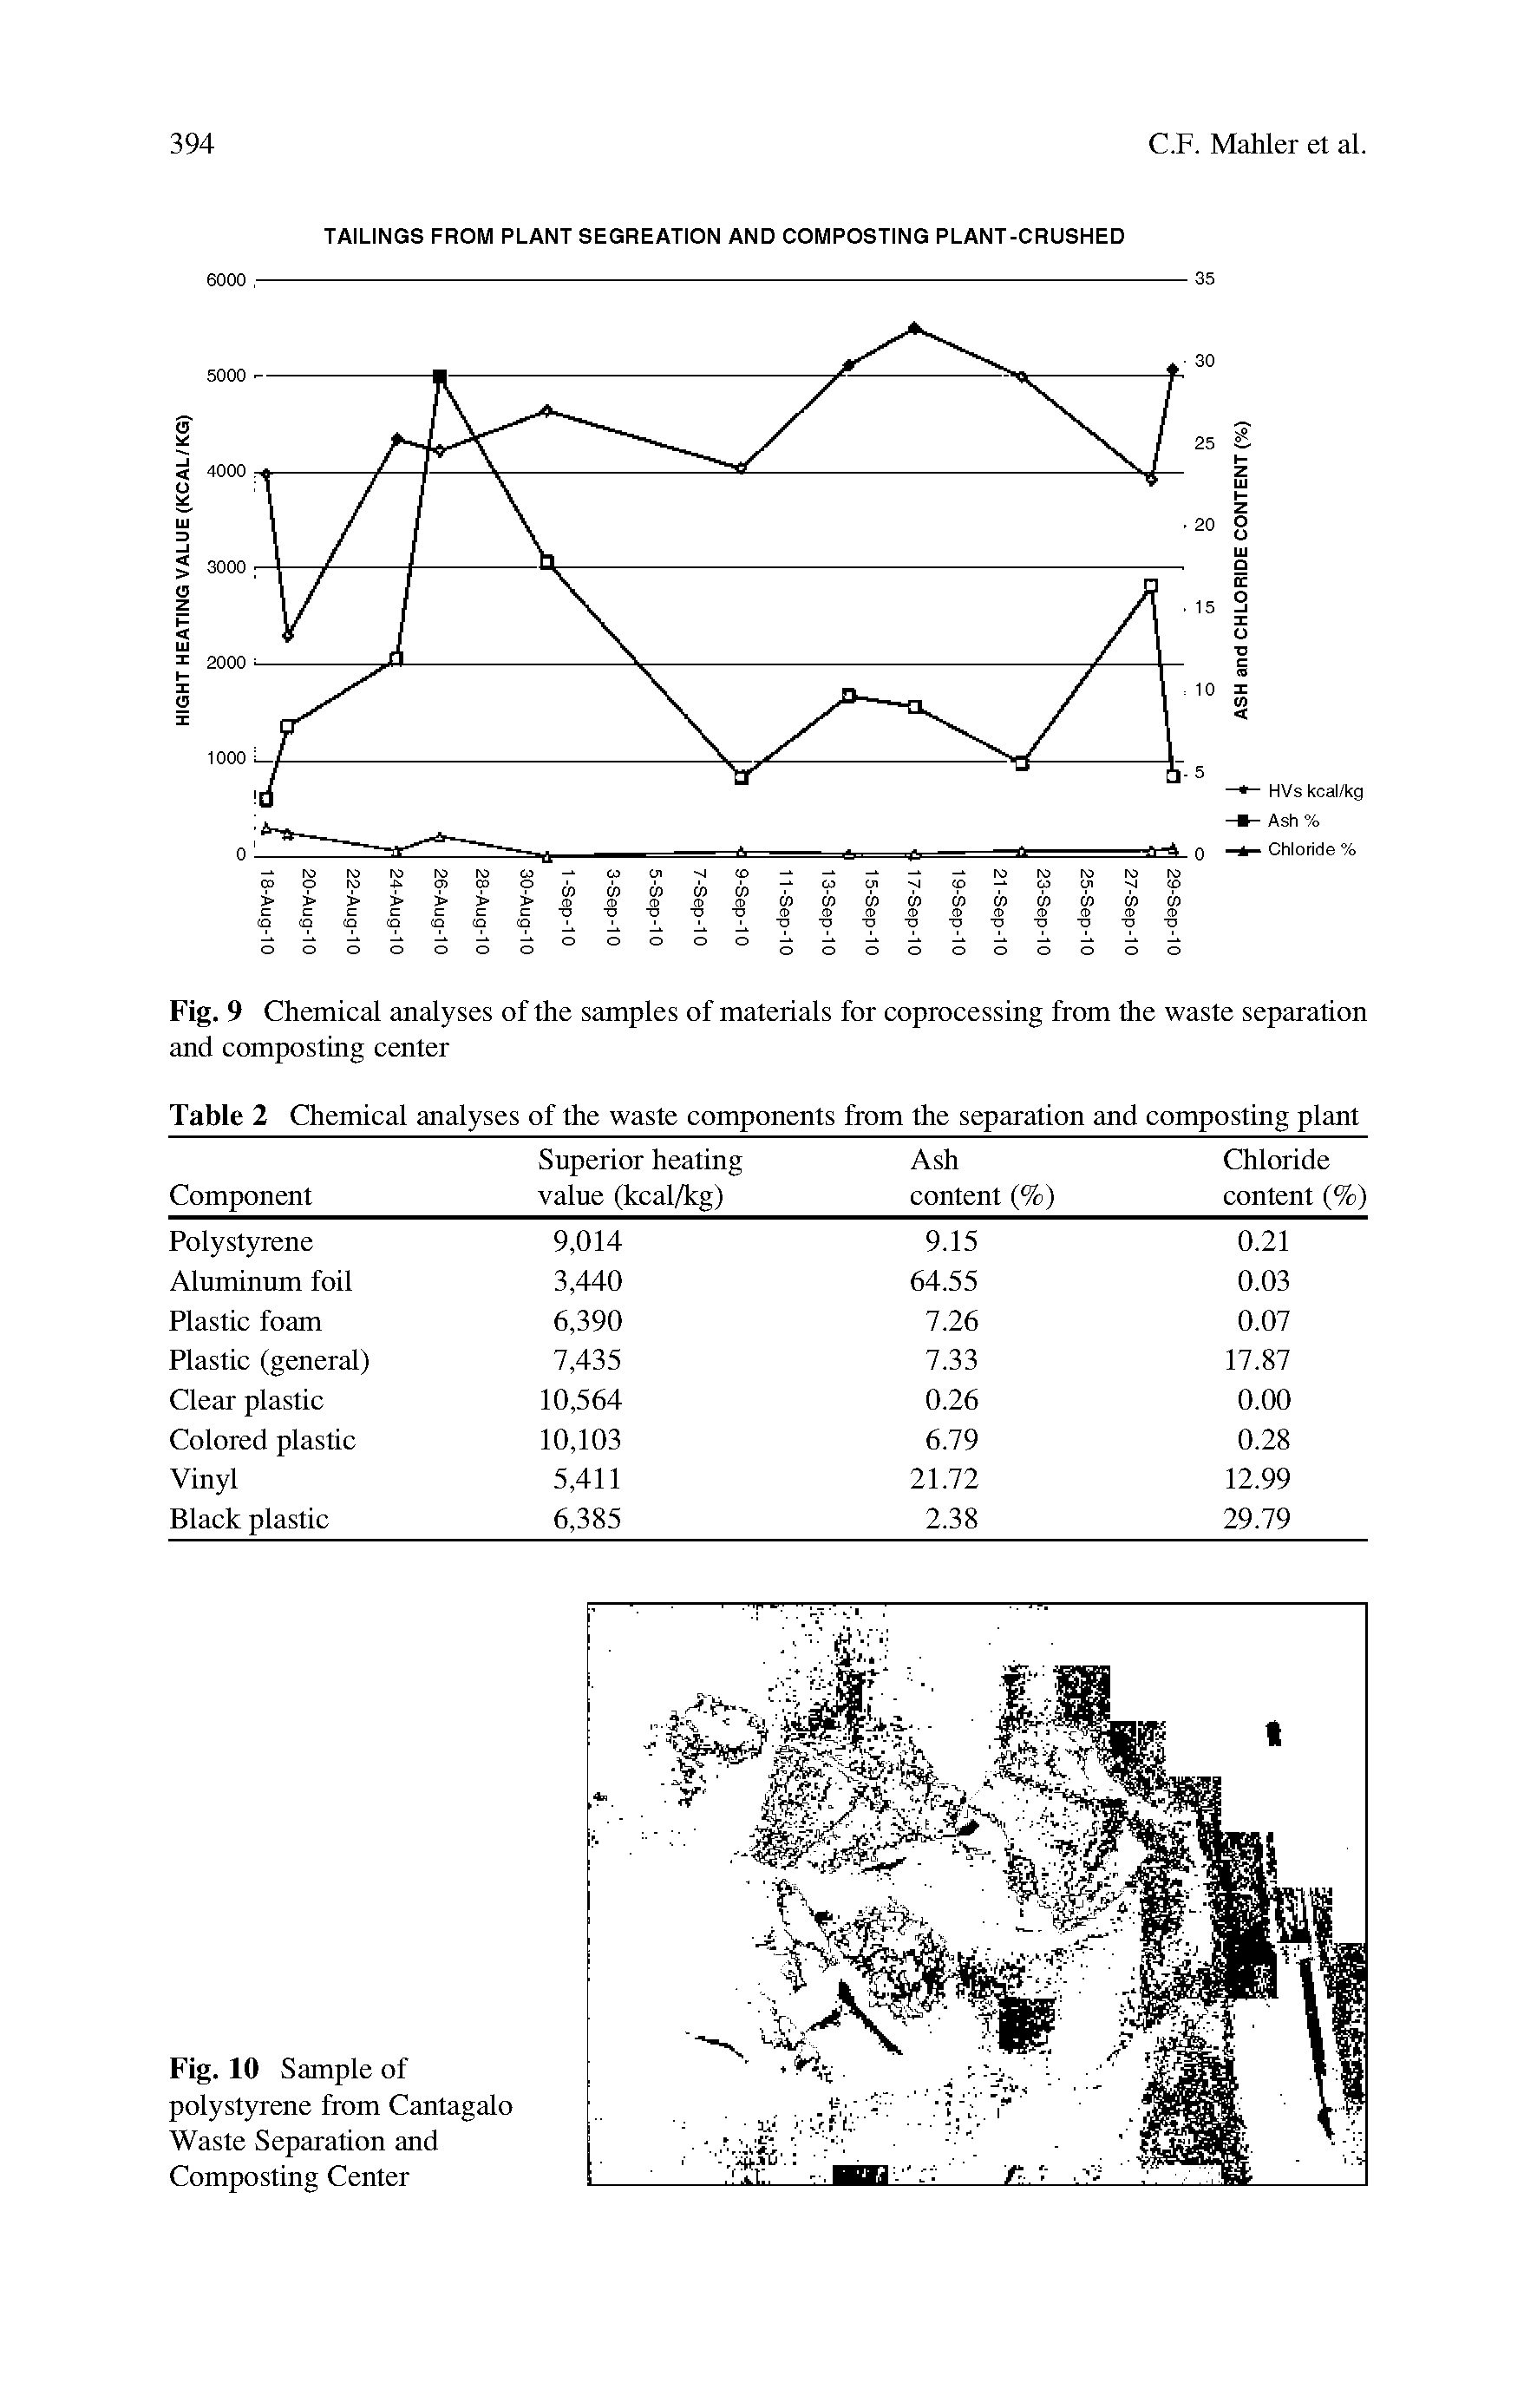 Fig. 9 Chemical analyses of the samples of materials for coprocessing from the waste separation and composting center...